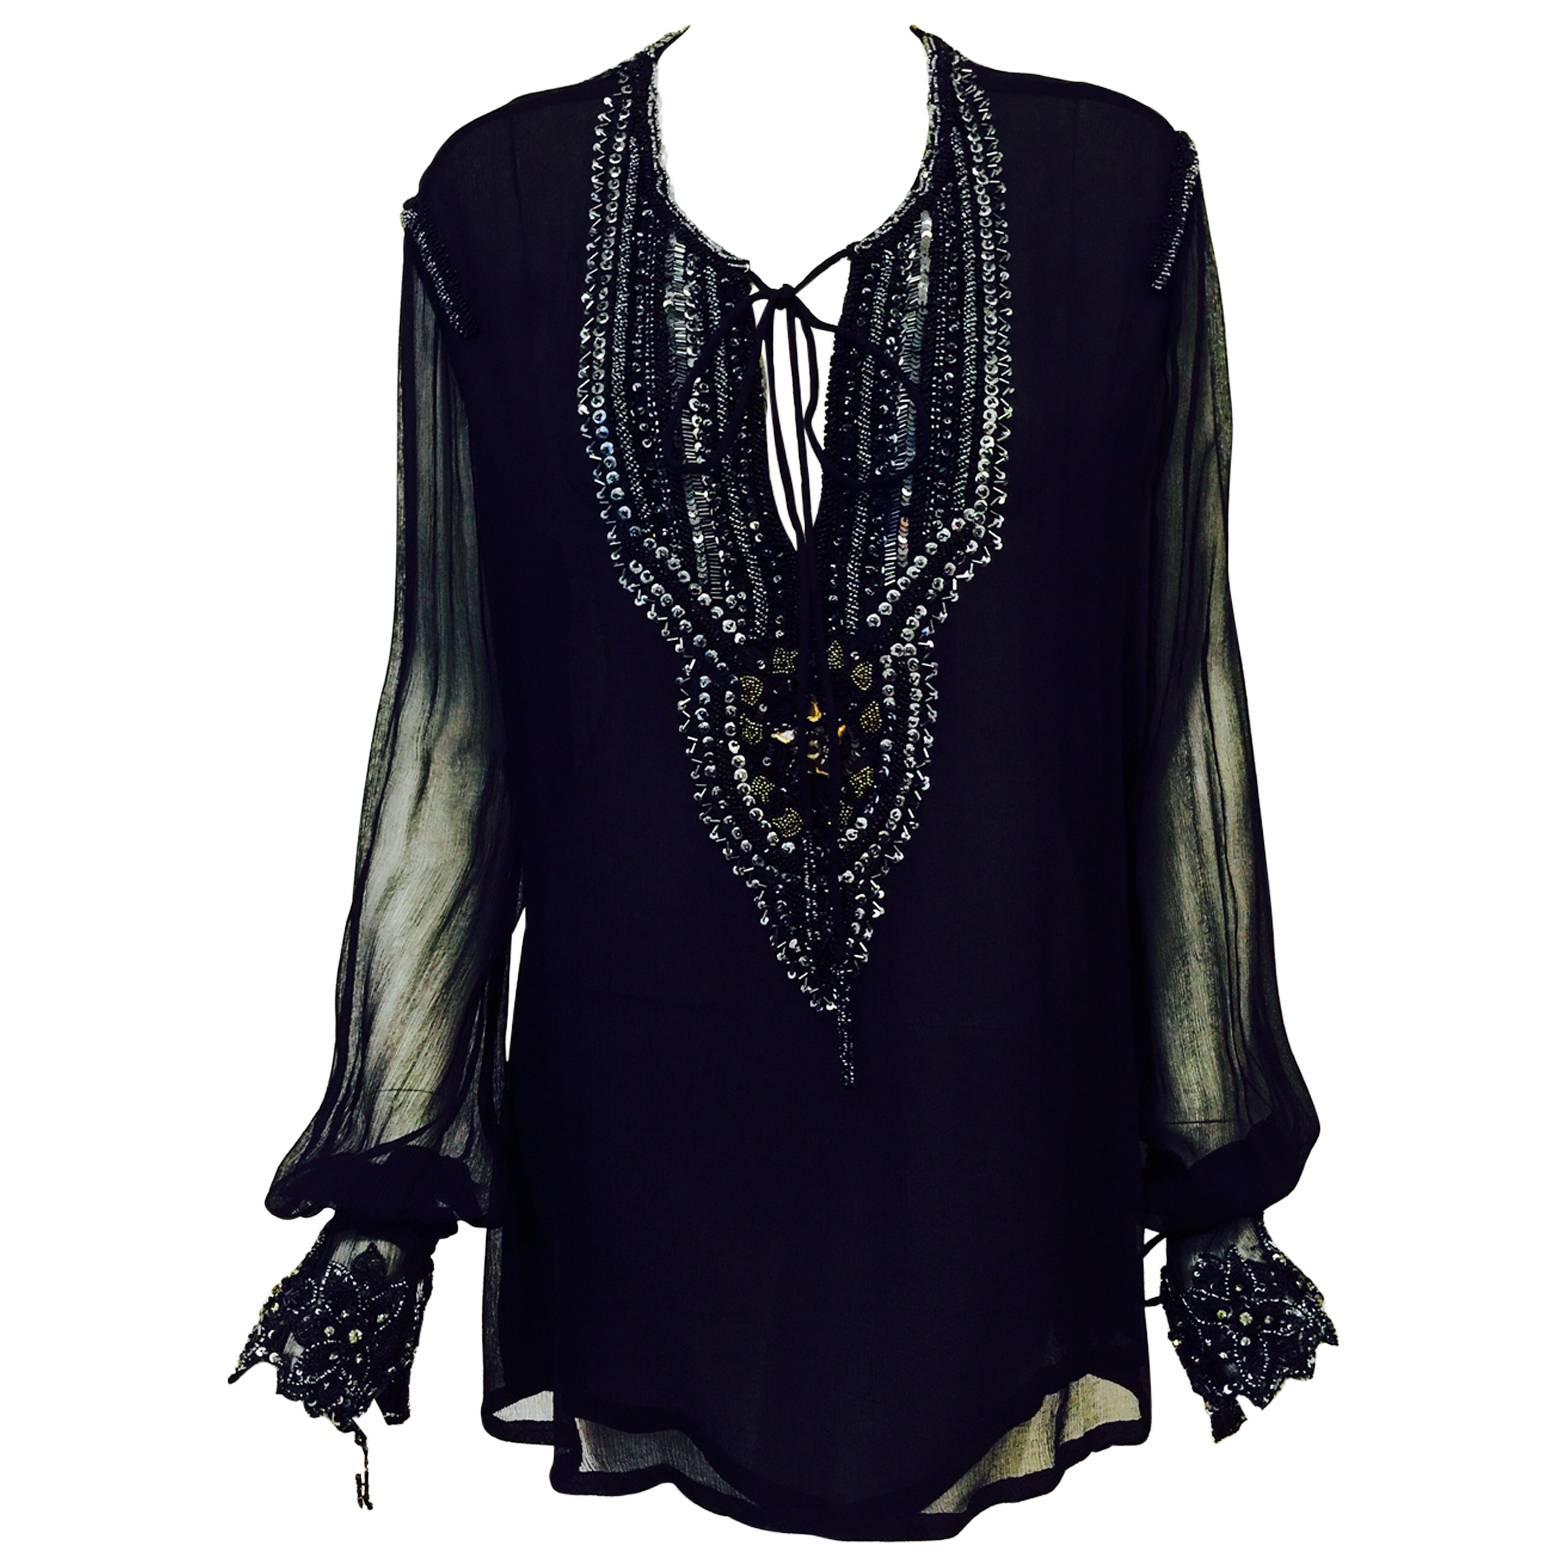 Just Cavalli Black Silk Tunic With Poet Sleeves and Metallic Embroidery 